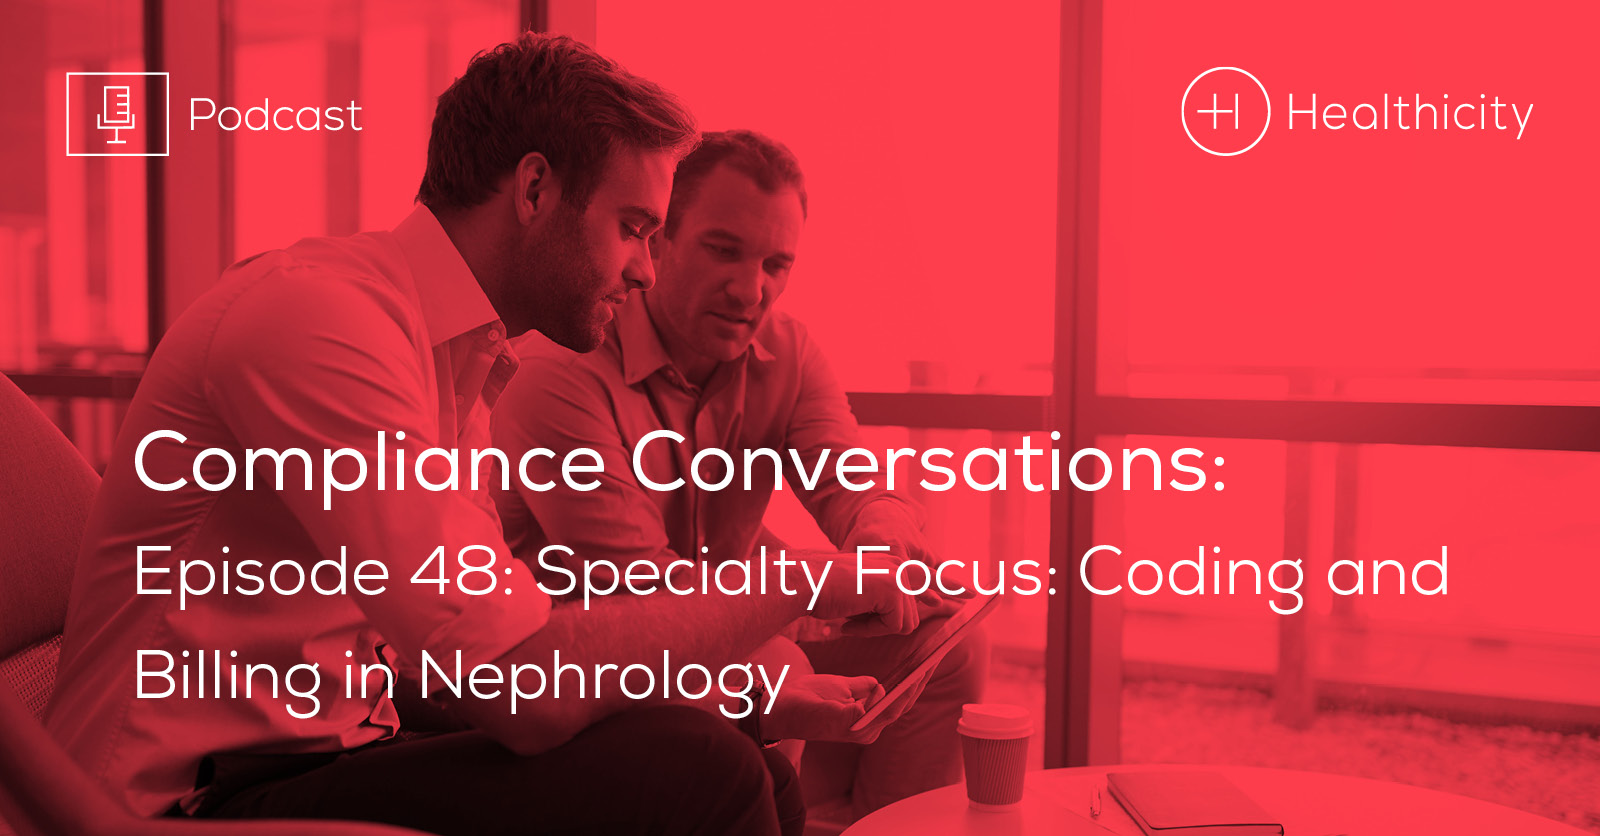 Listen to the Episode - Specialty Focus: Coding and Billing in Nephrology 